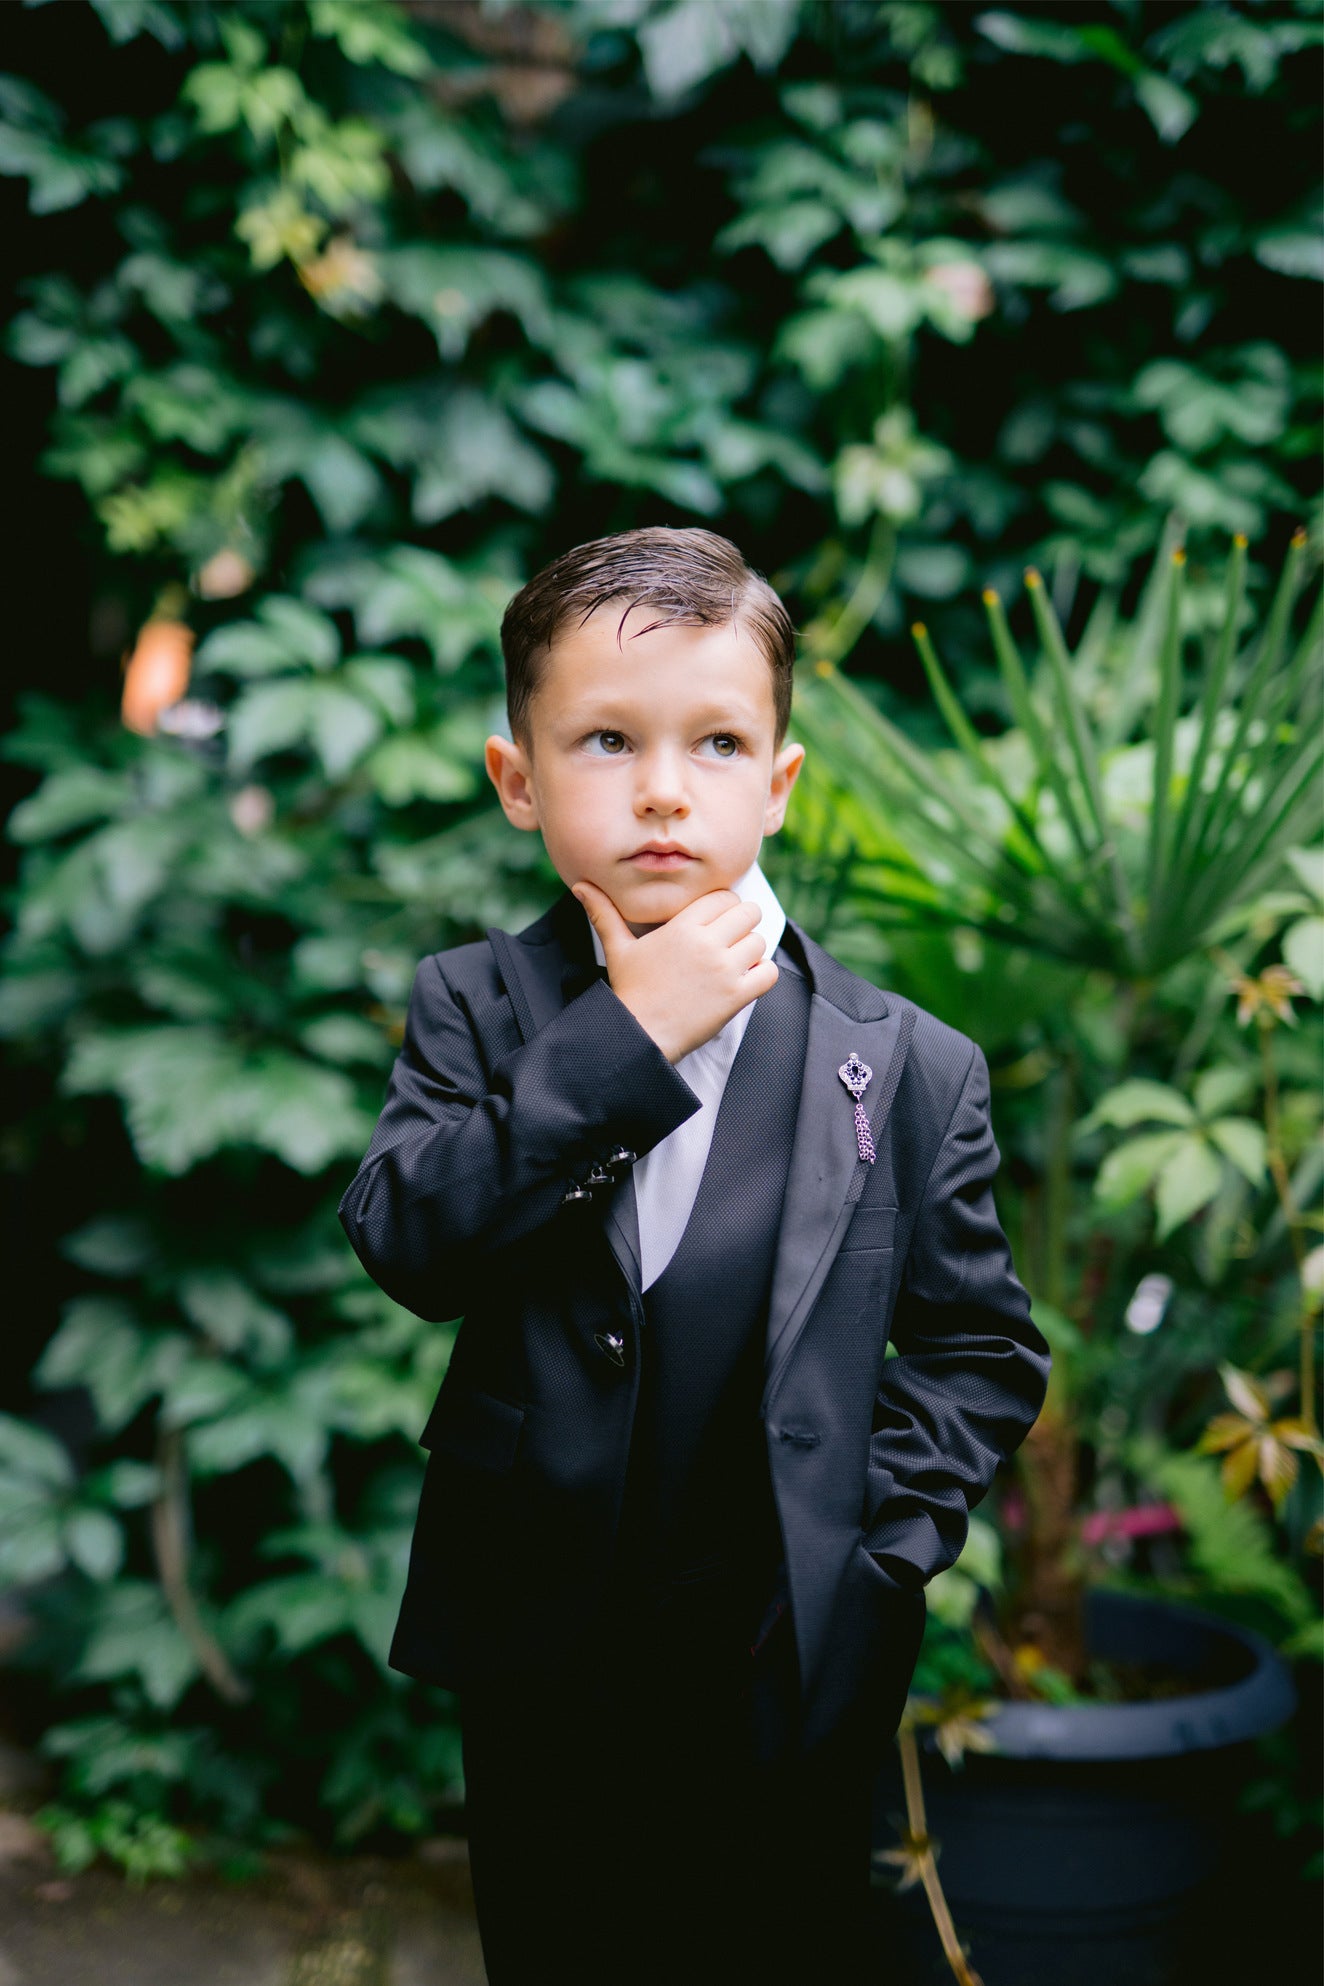 Discover more than 140 boys black suit